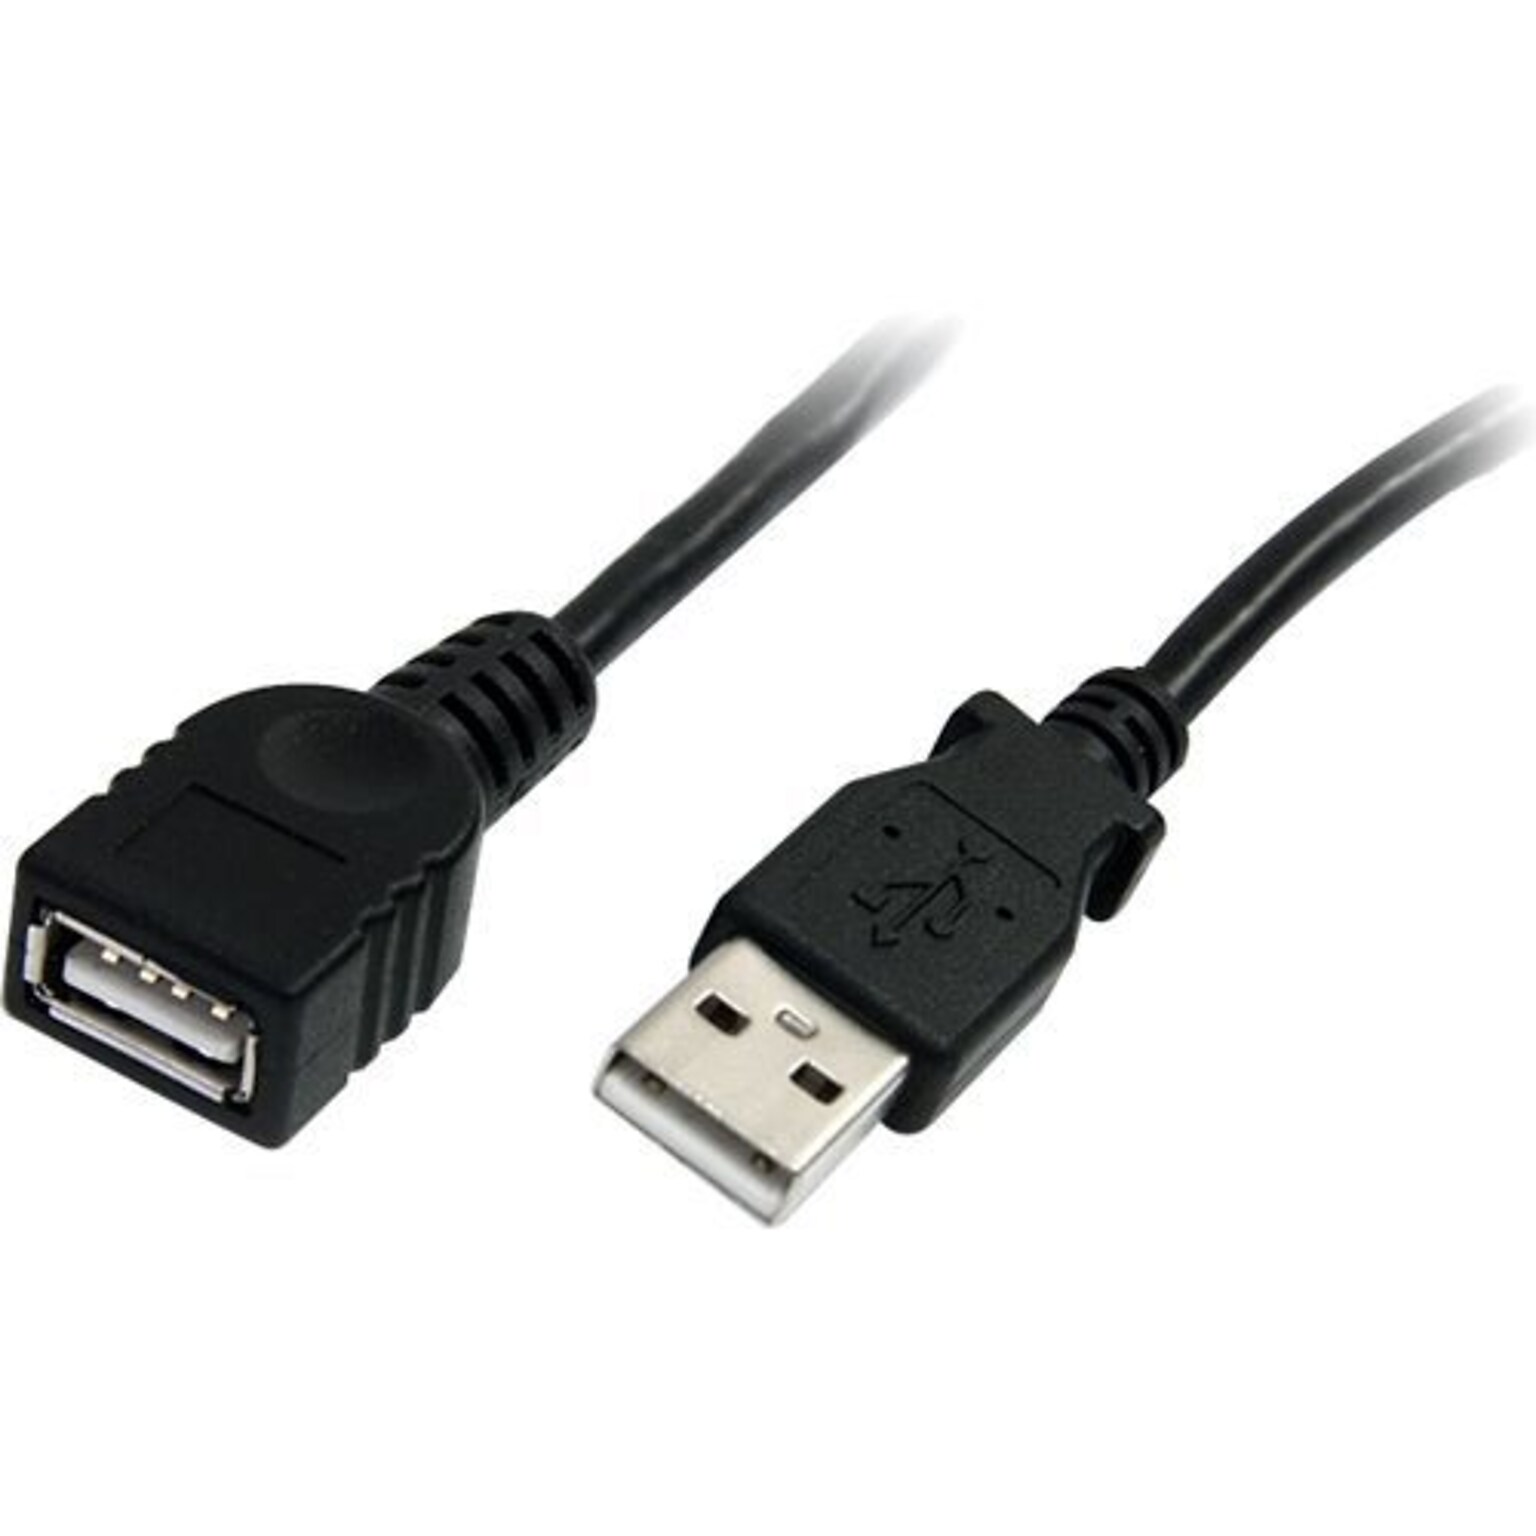 Startech 10 USB A Male to USB A Female Extension Cable; Black